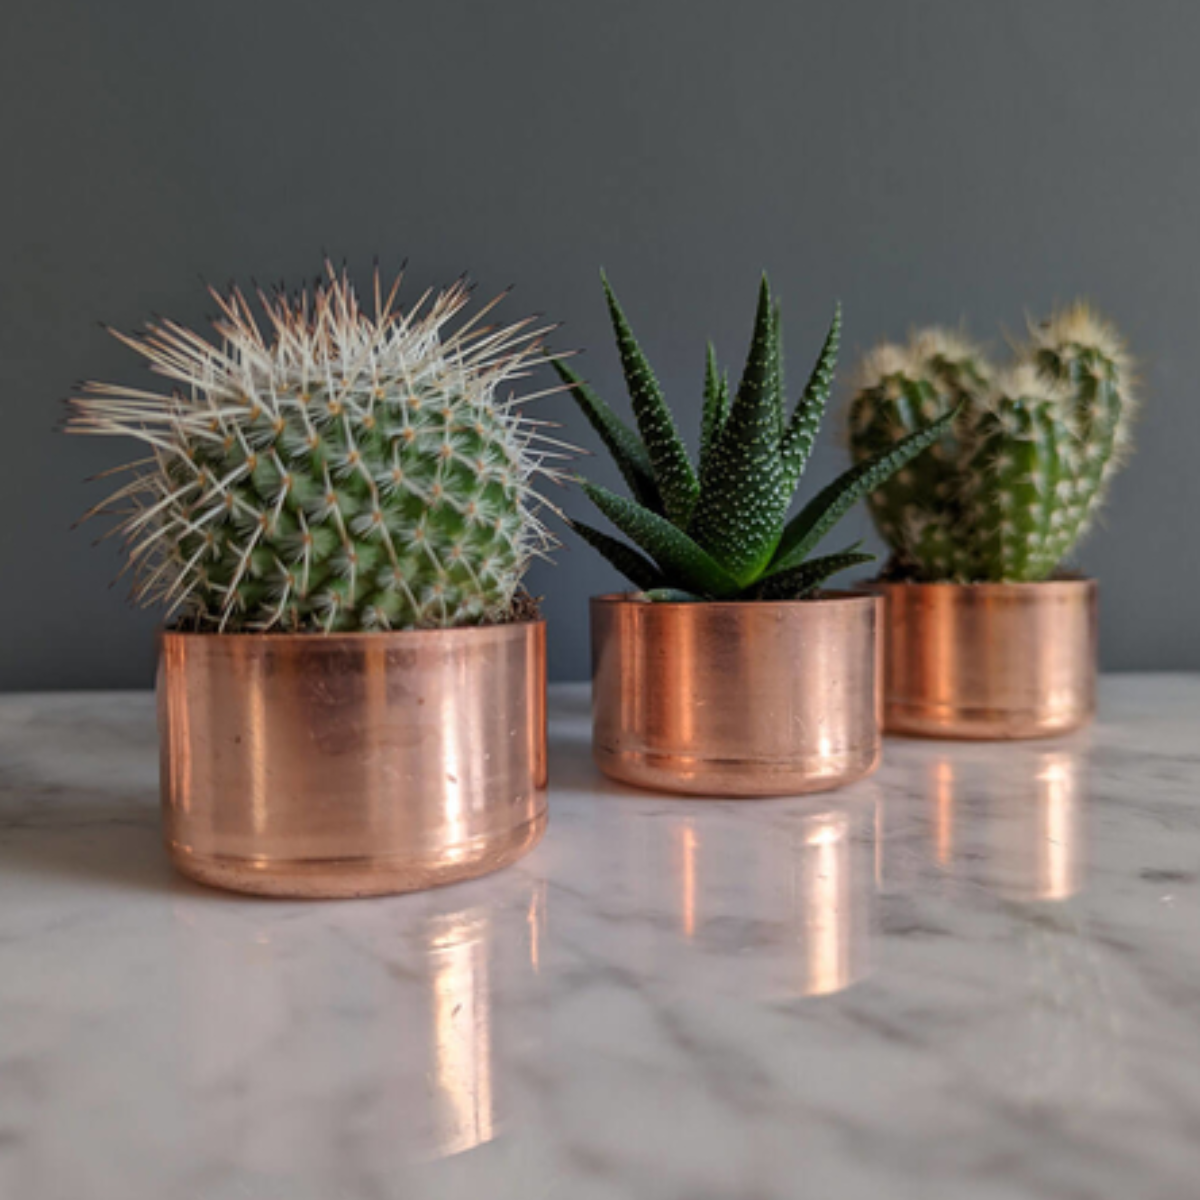 28. Celebrate 8 Years of Love with a Stunning Copper Plant Pot and Succulent